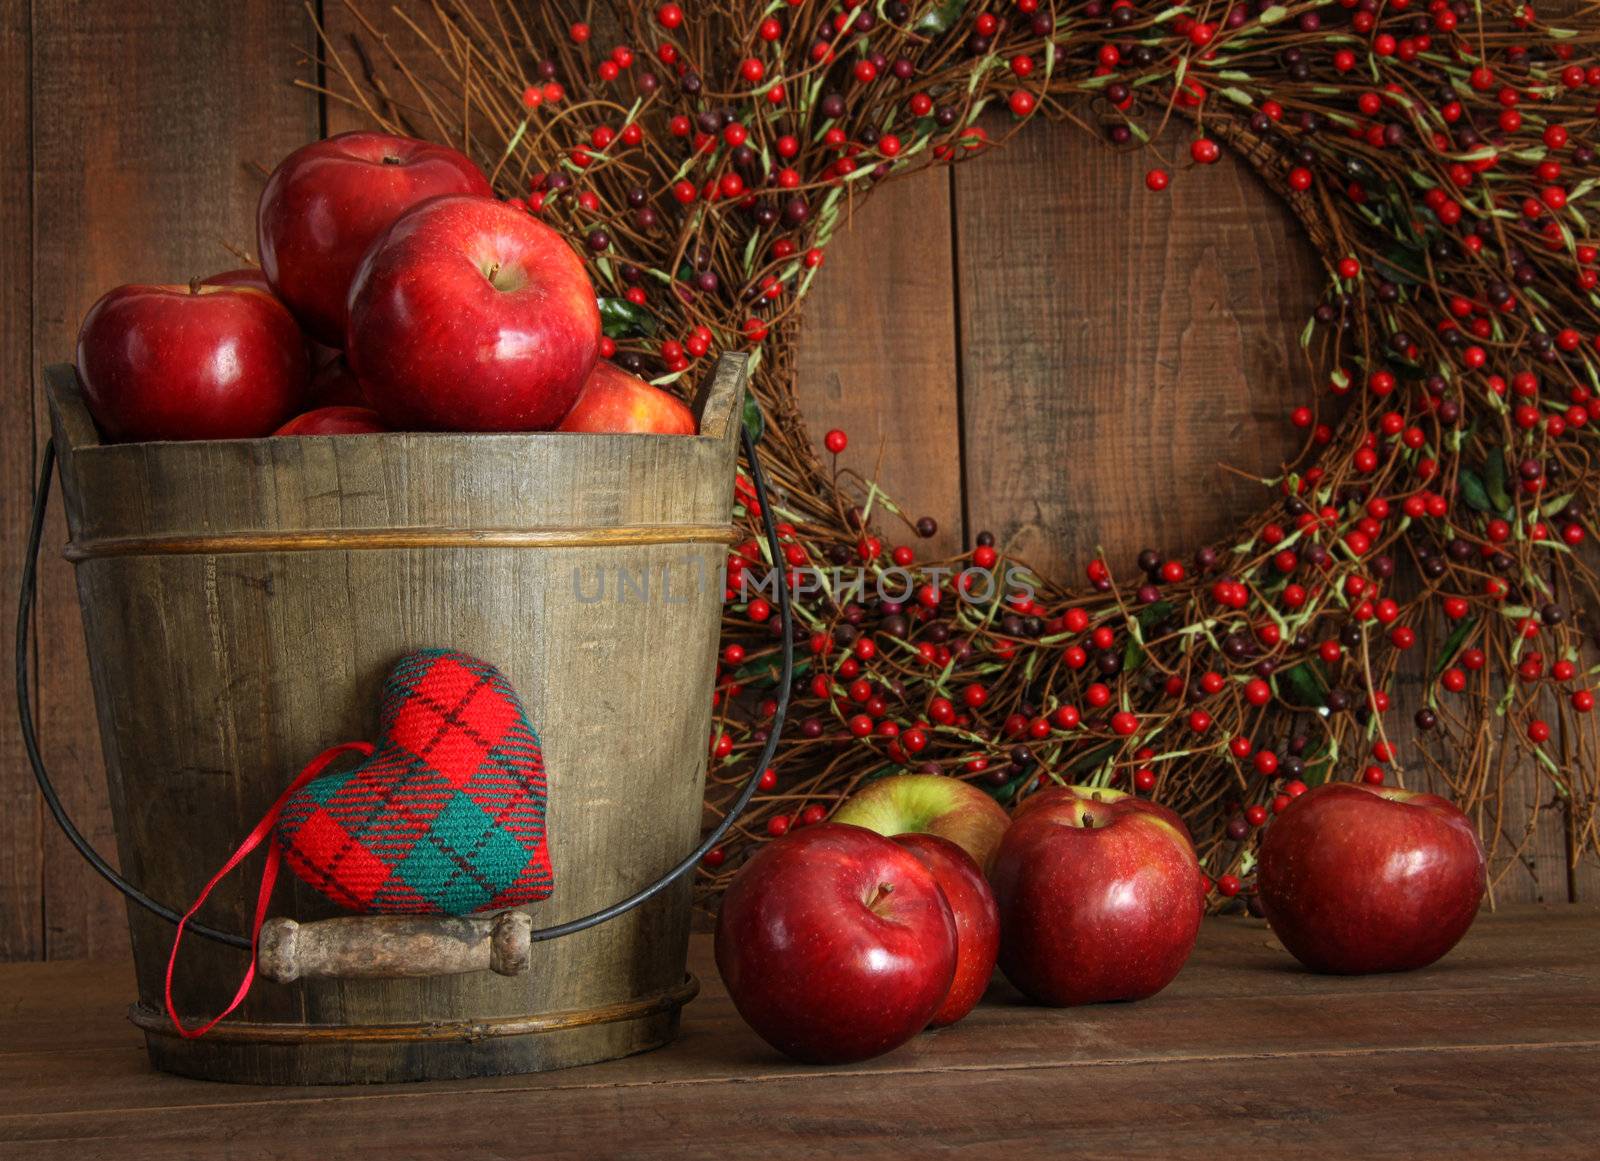 Red apples in wood bucket for holiday baking